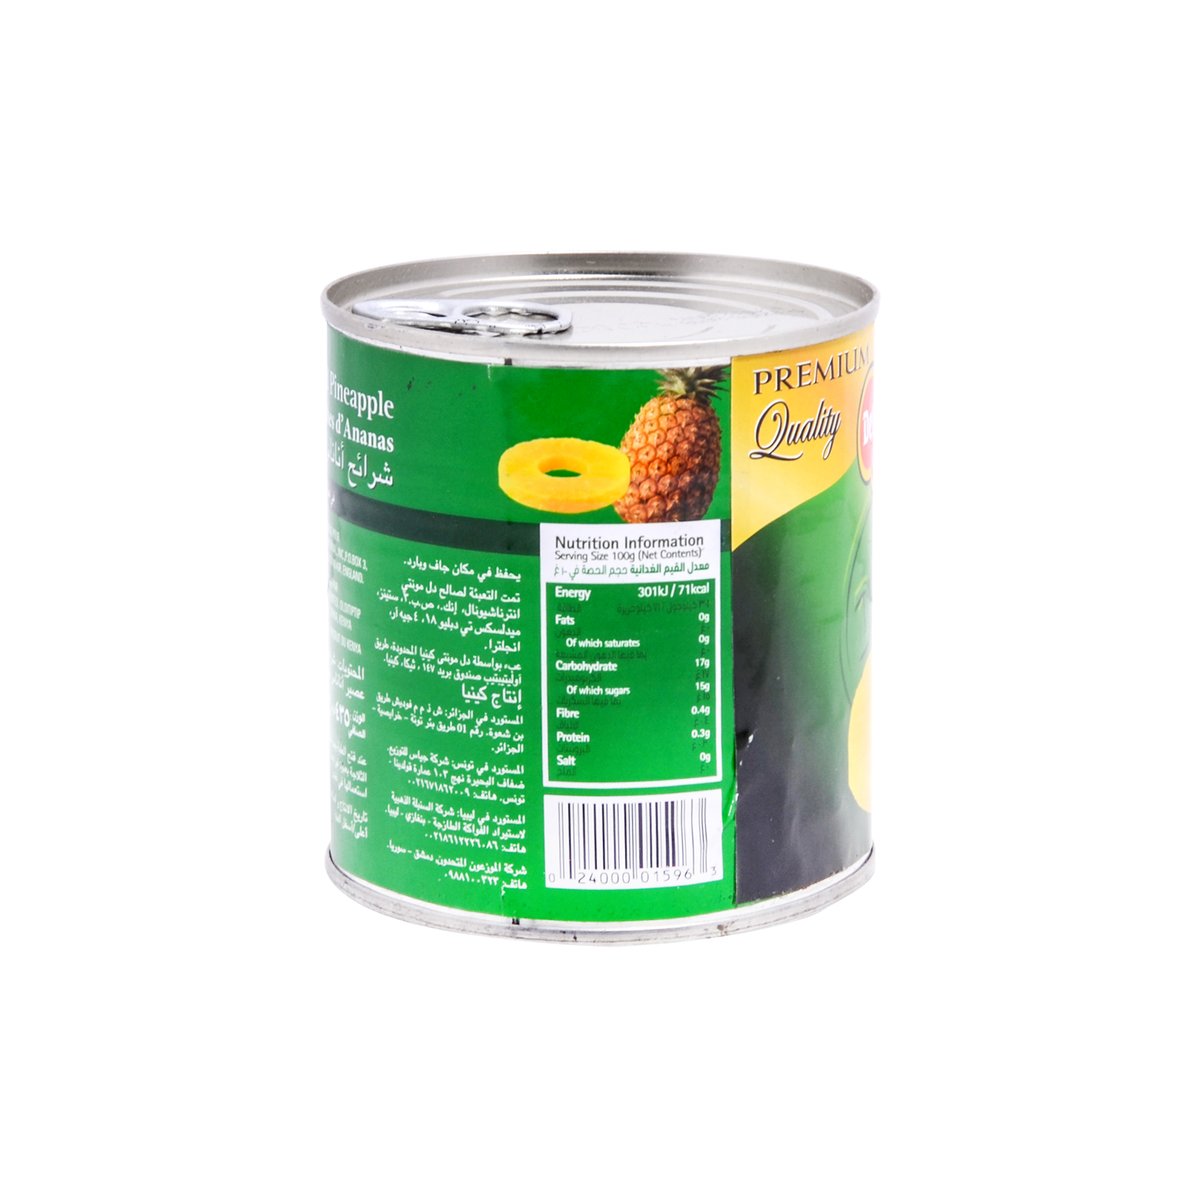 Del Monte Sliced Pineapple in Syrup 432 g